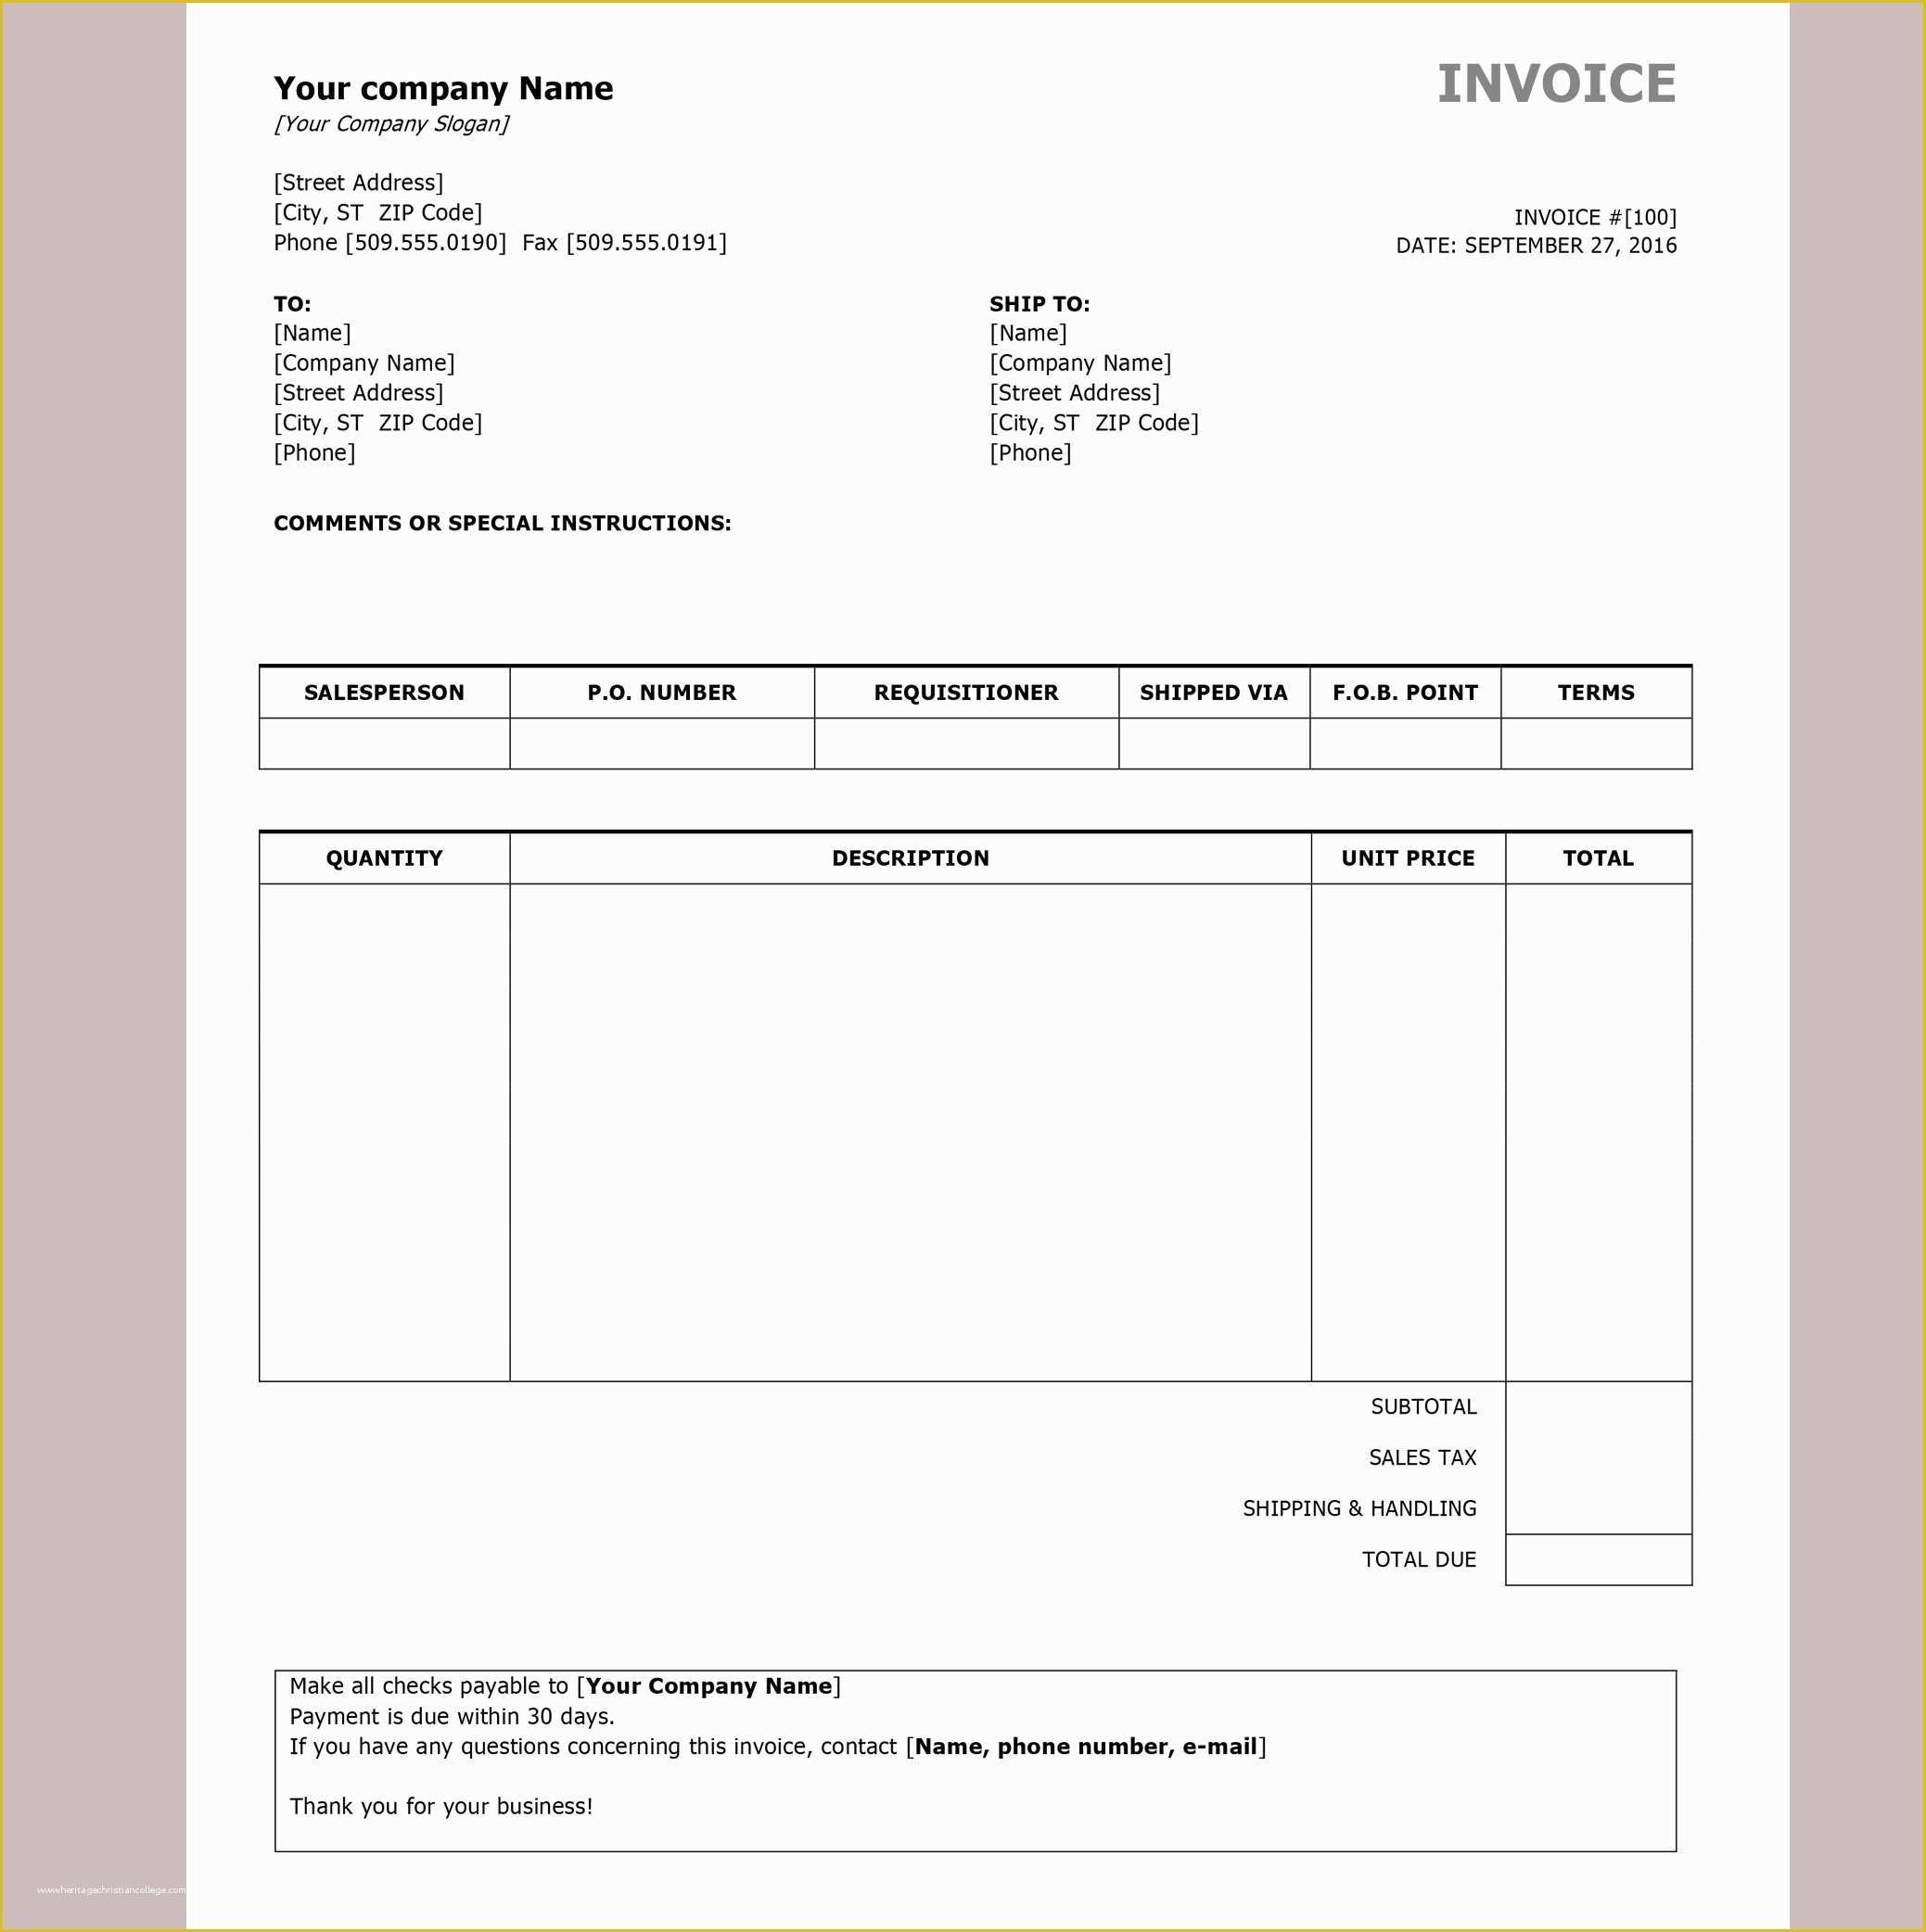 Free Basic Invoice Template Word Of Free Invoice Templates by Invoiceberry the Grid System